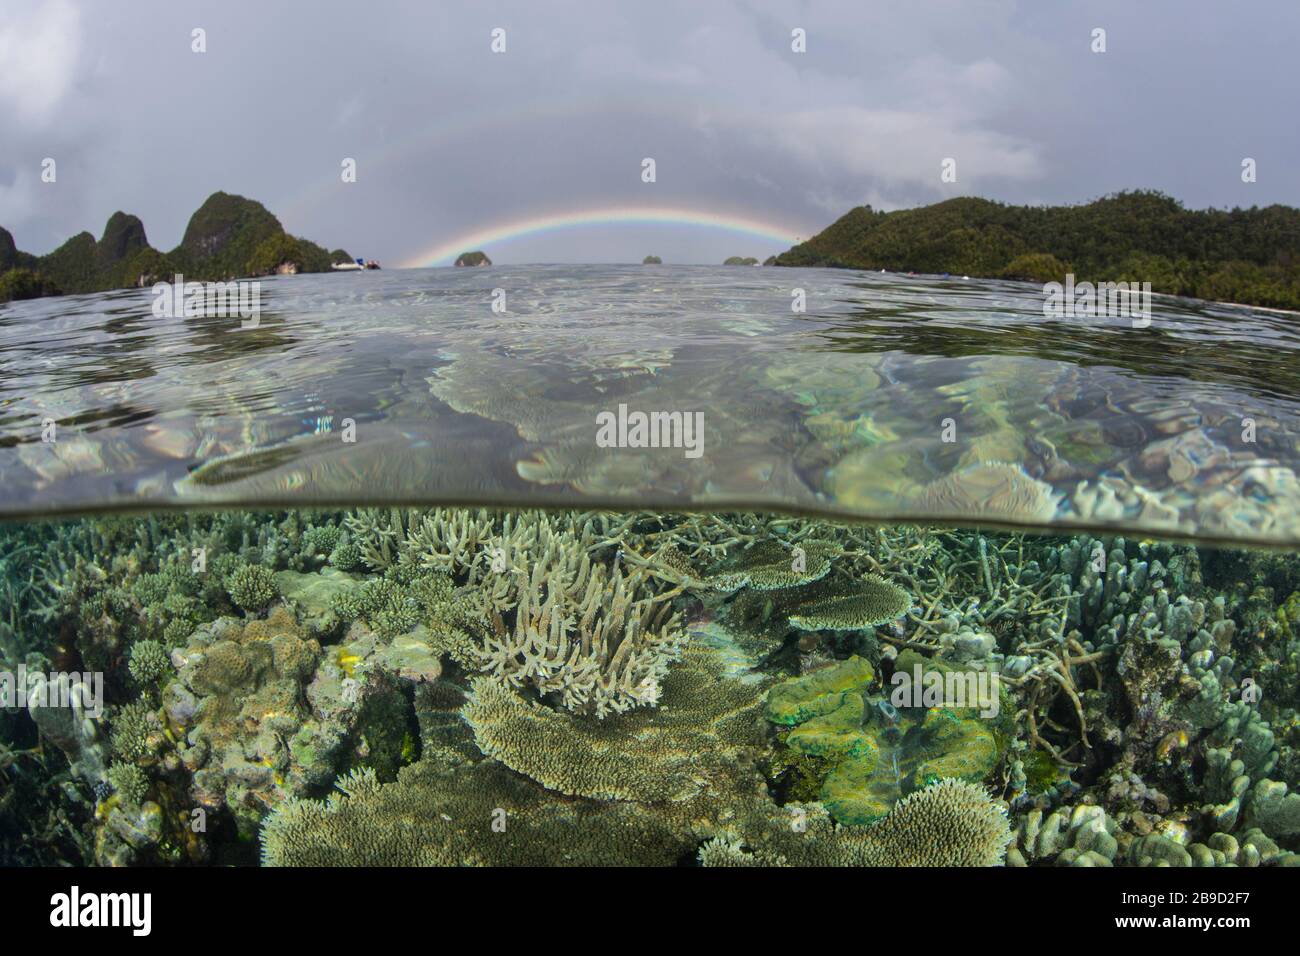 A rainbow appears above a coral reef amid the islands of Raja Ampat, Indonesia. Stock Photo